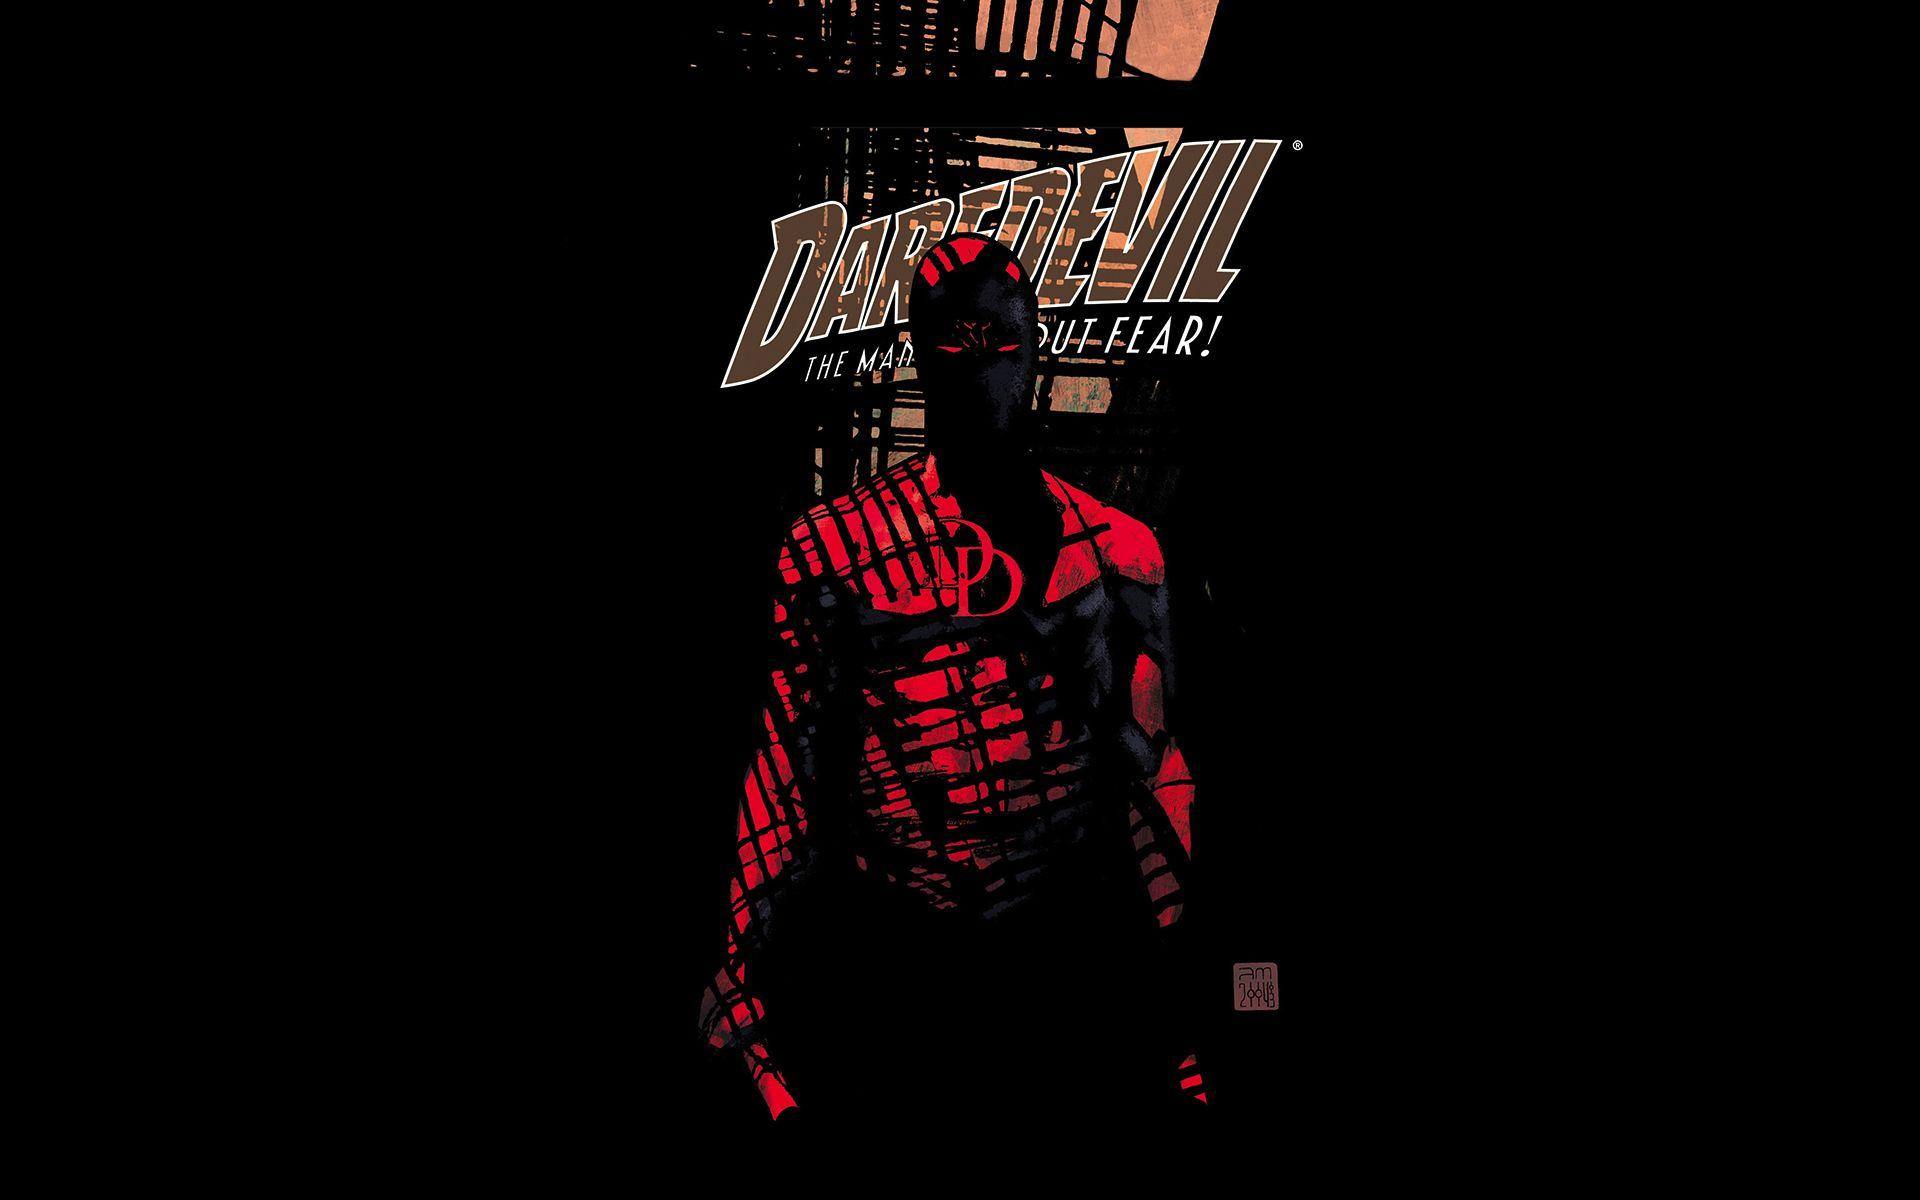 DAREDEVIL WALLPAPER (I cant wait for the show, so I made myself a wallpaper with one of my favorite covers enjoy)